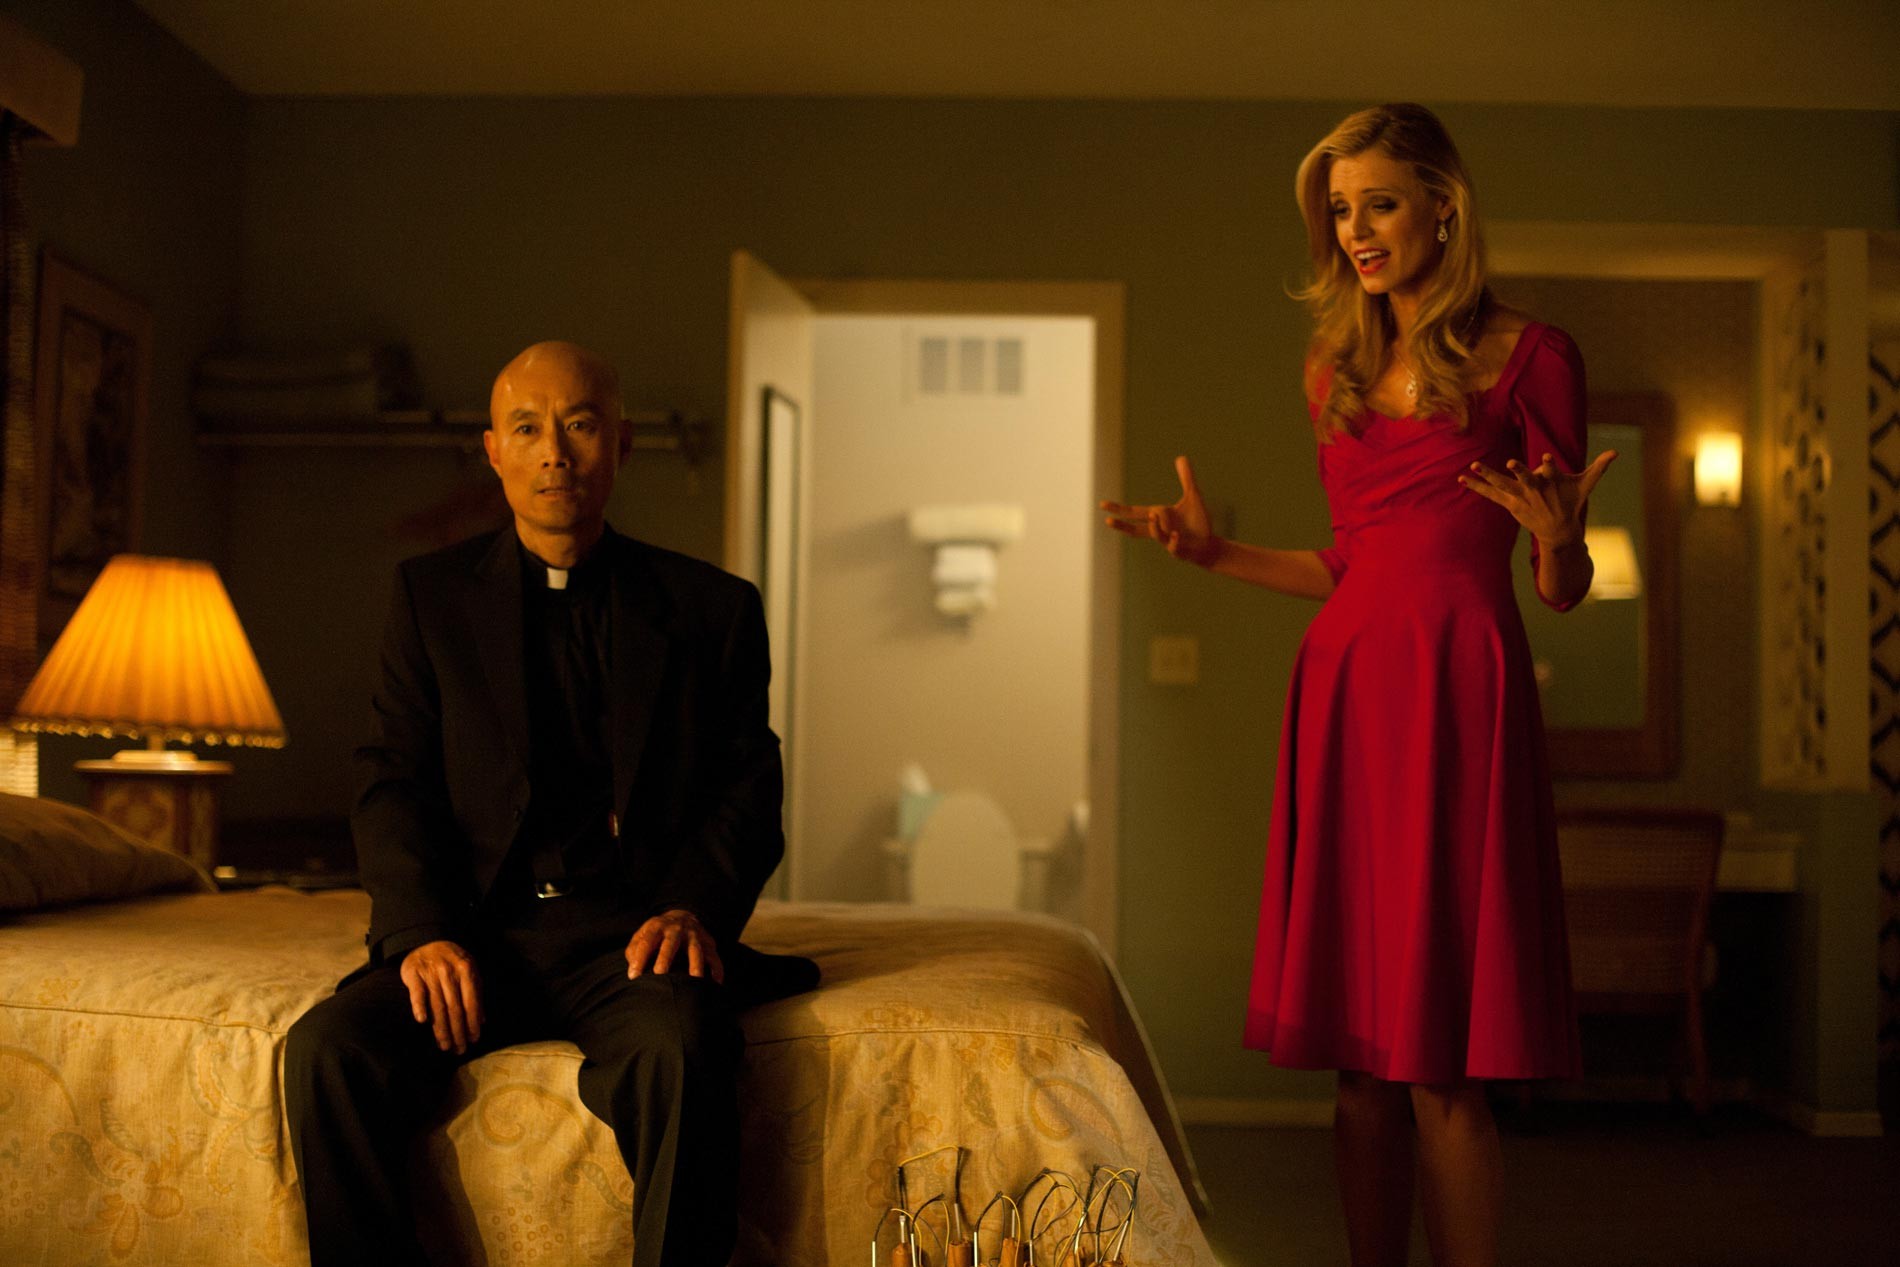 Long Nguyen stars as Vietnamese Priest and Helena Mattsson stars as Blonde Lady in CBS Films' Seven Psychopaths (2012)